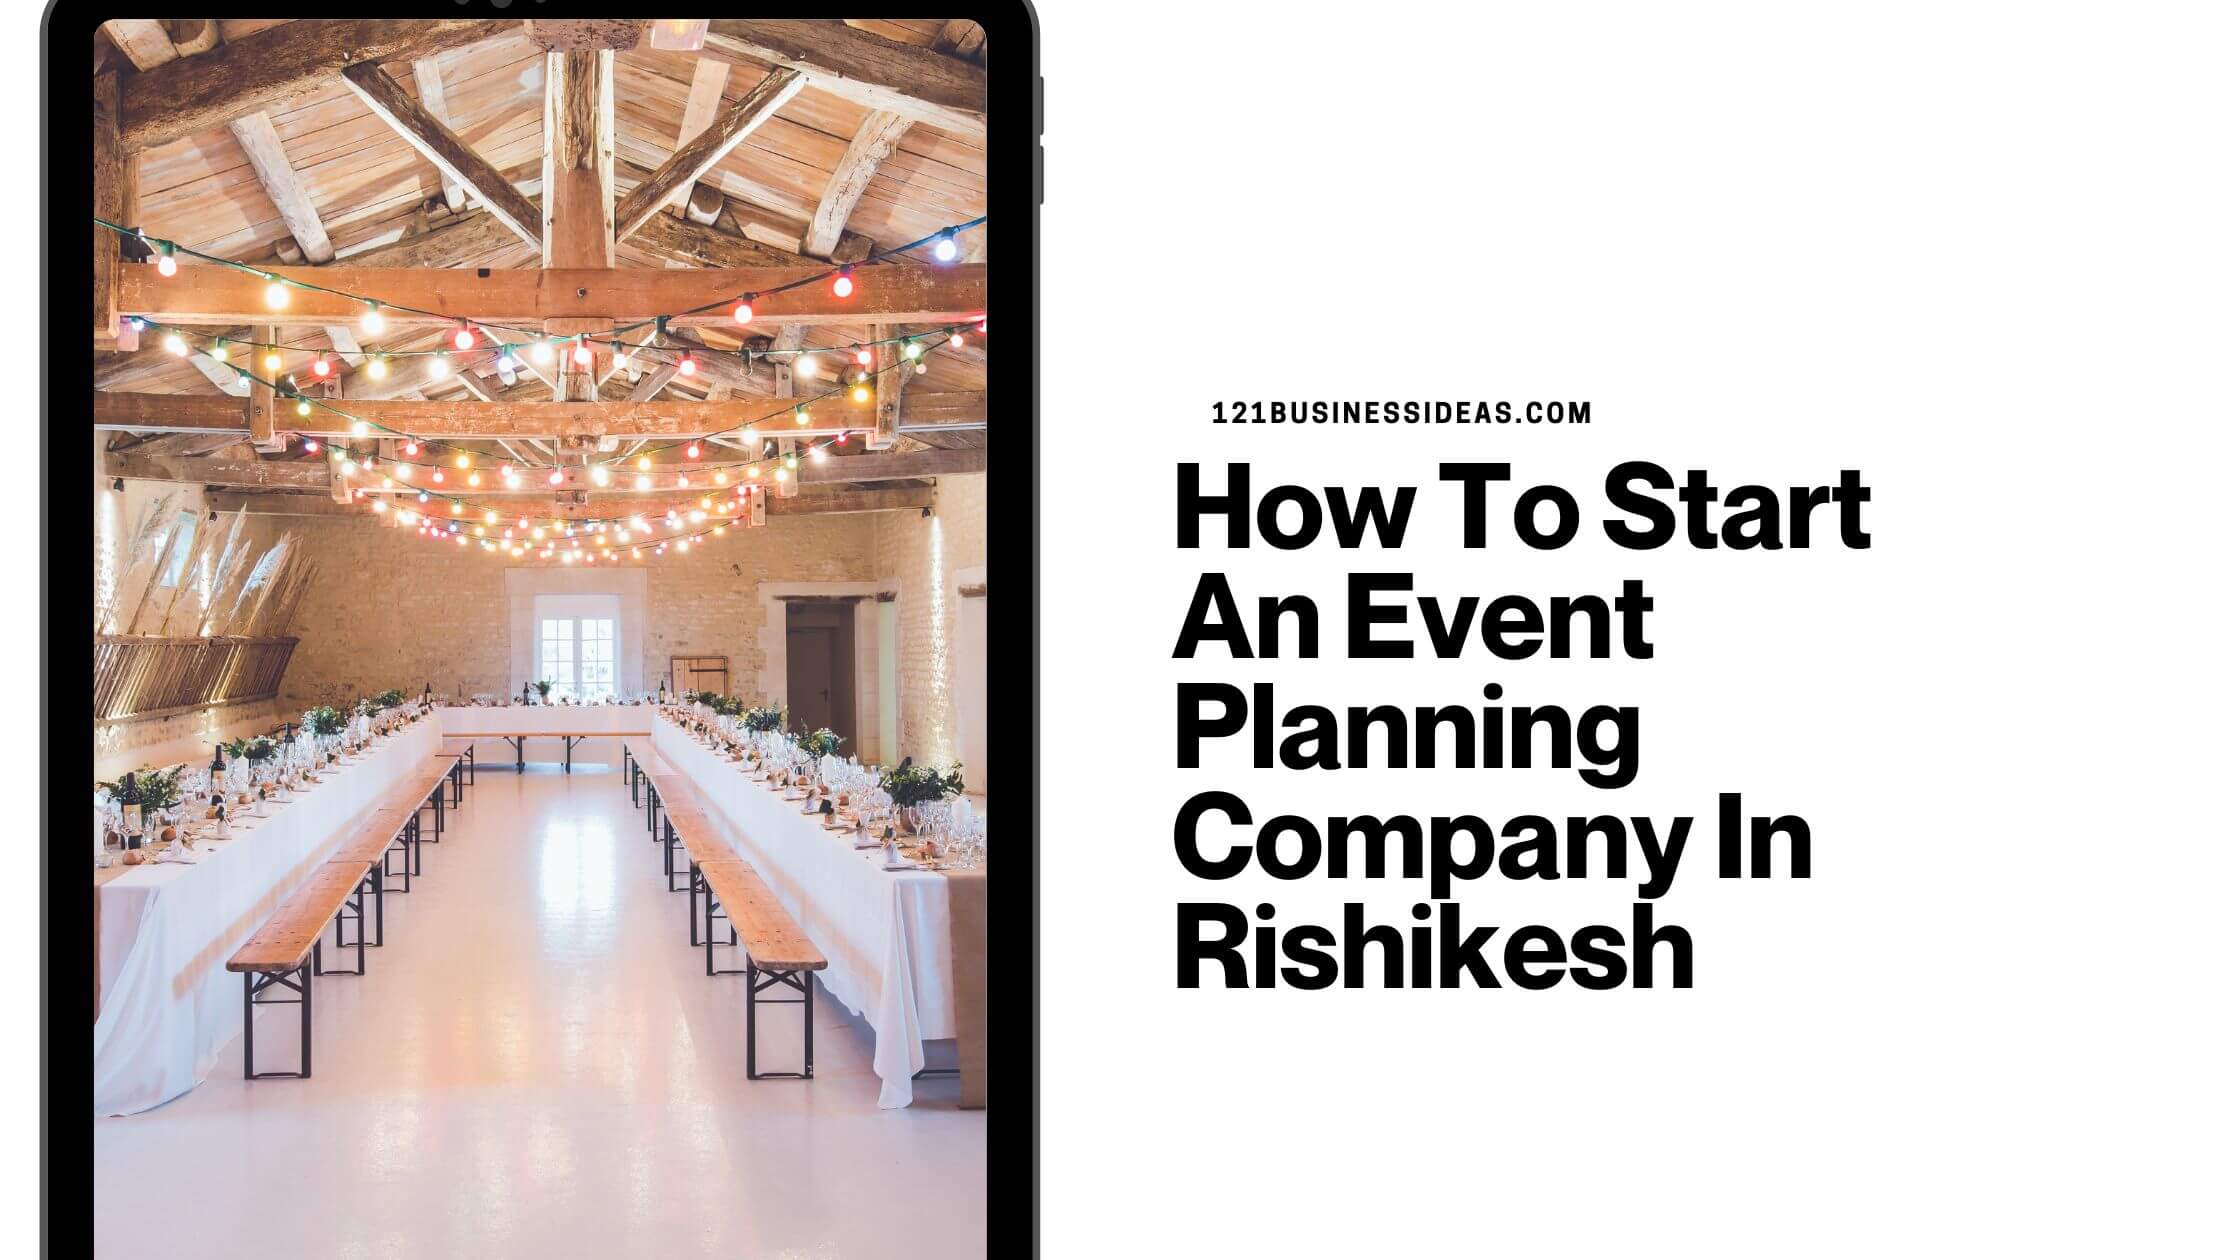 How To Start An Event Planning Company In Rishikesh (1)